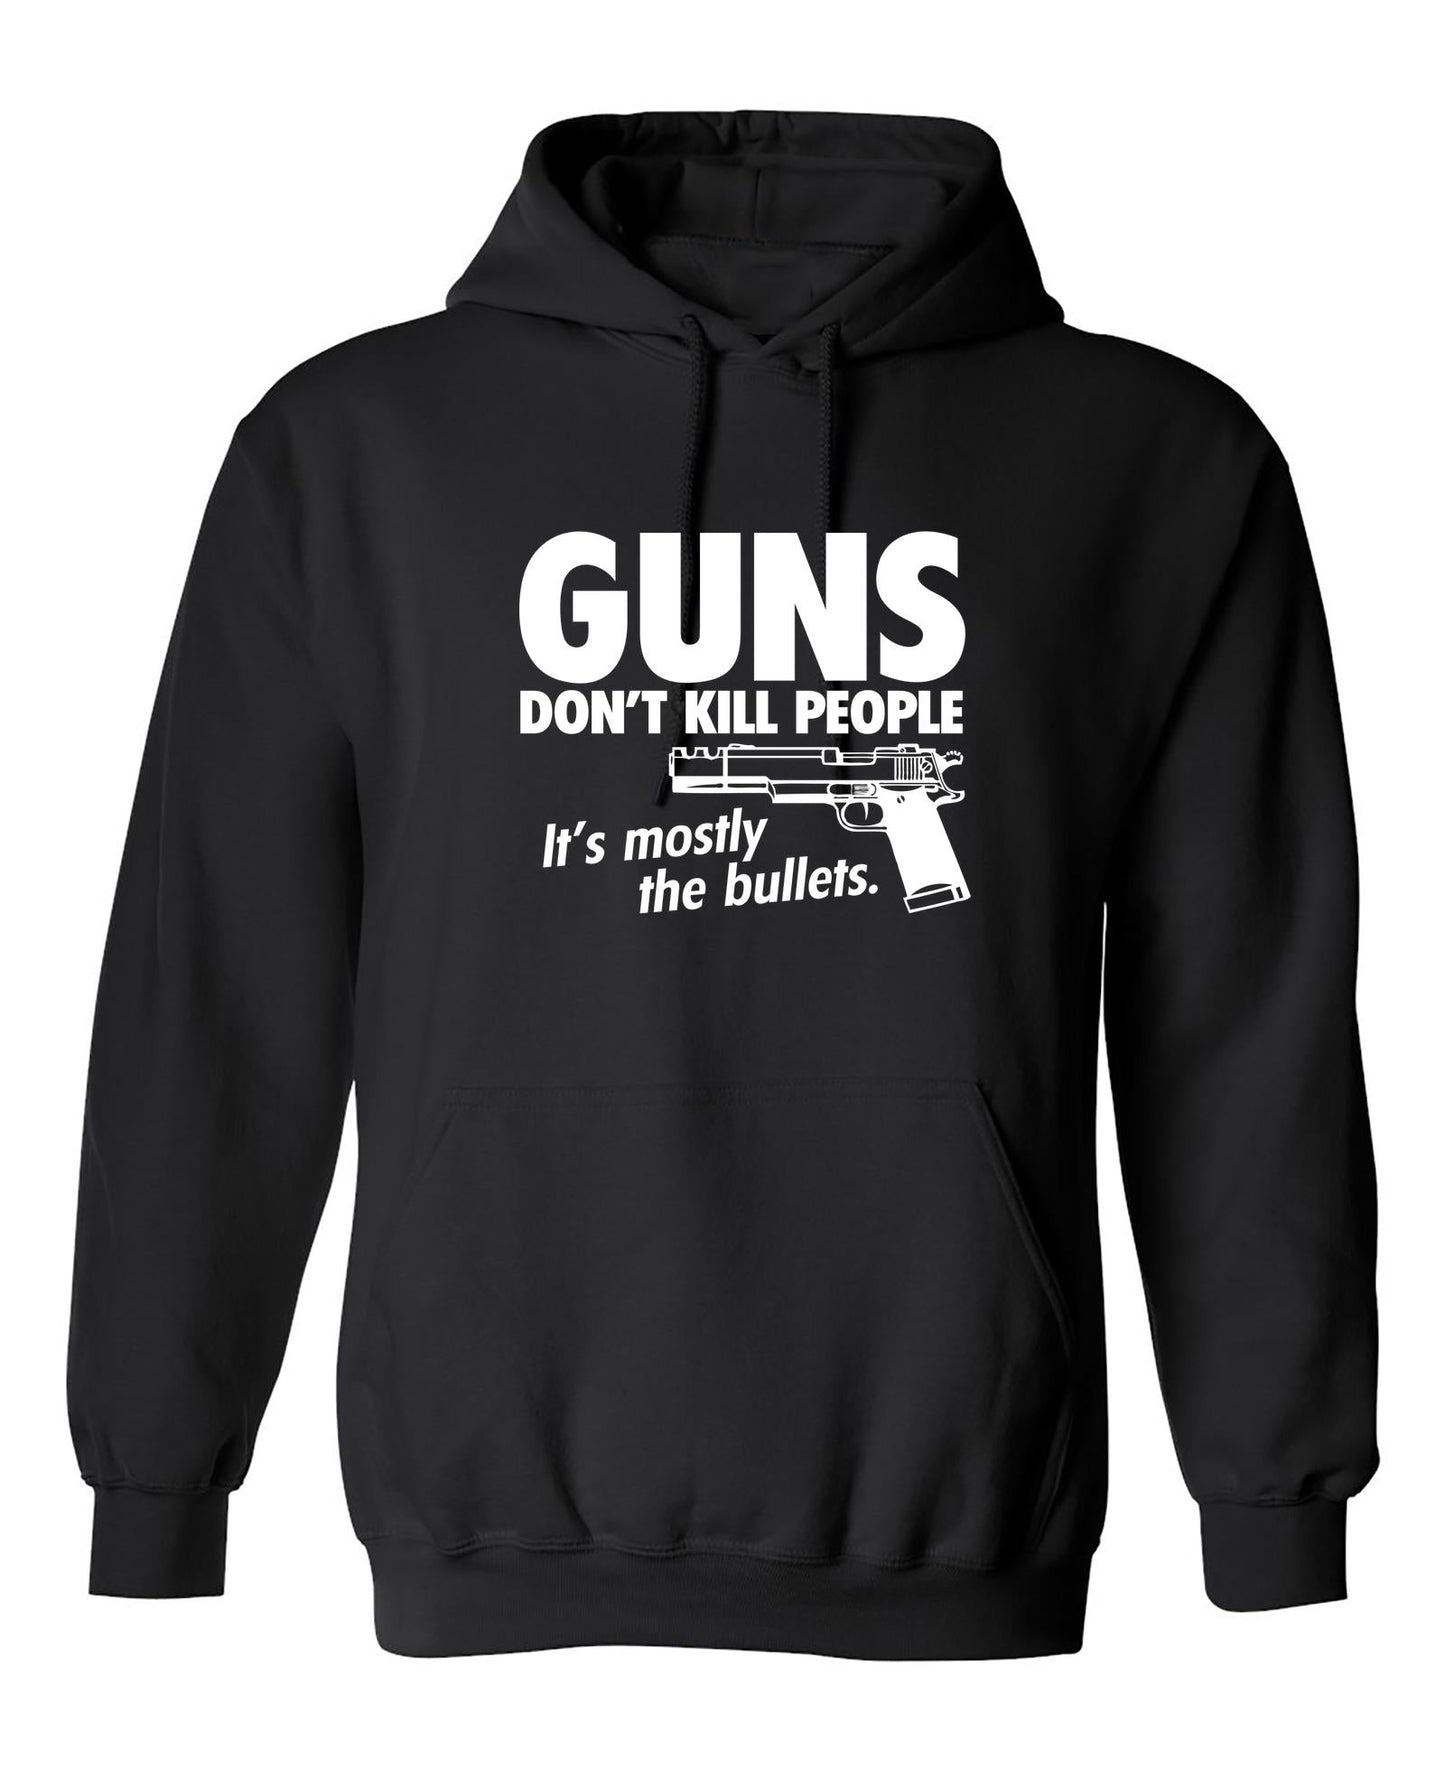 Funny T-Shirts design "Guns Don't Kill People Its Mostly The Bullets"